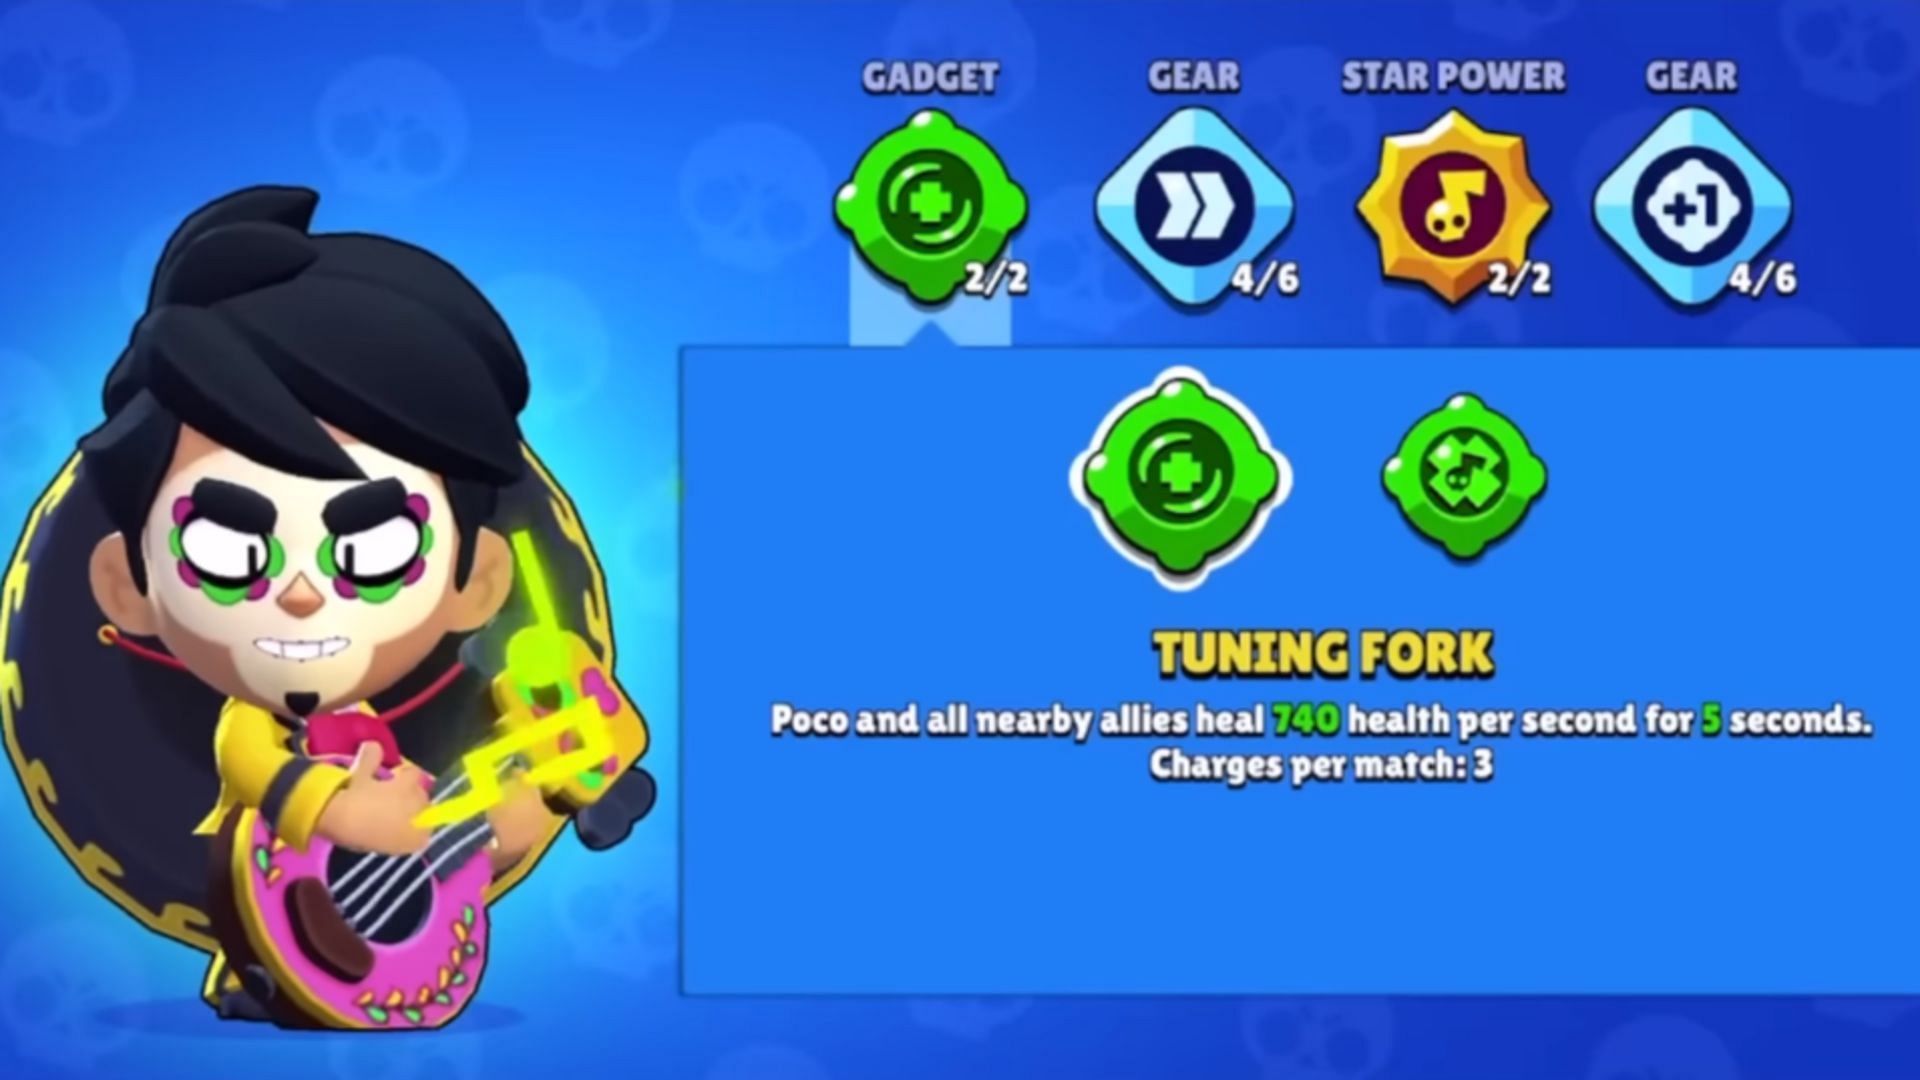 Tuning Fork Gadget (Image via Supercell)